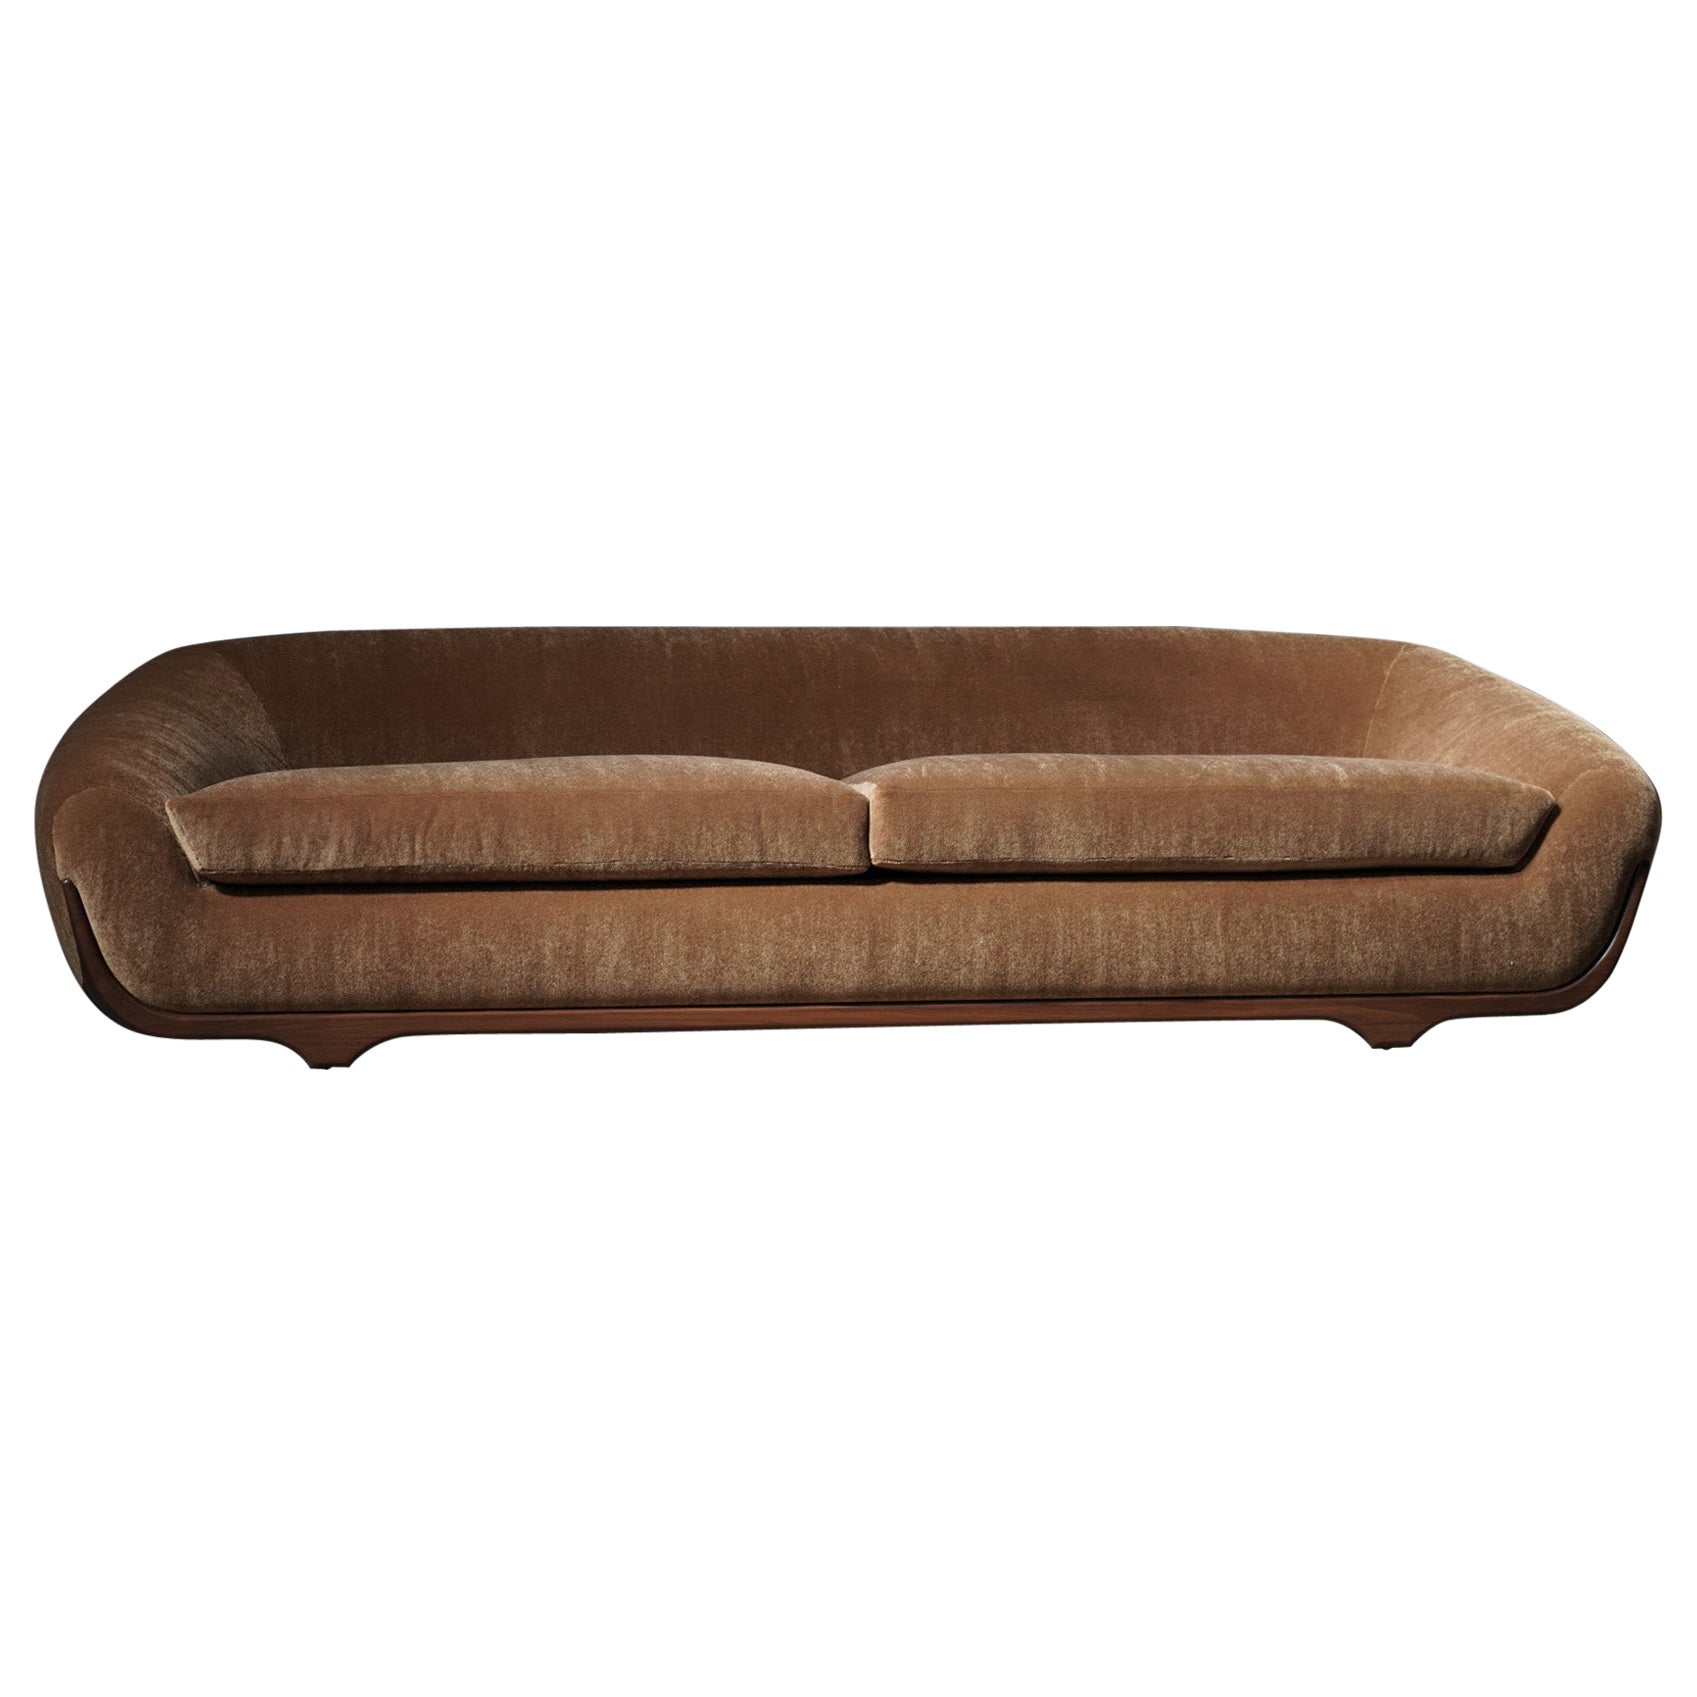 STRATUS Caramel Mohair Sofa with walnut frame by STUDIO BALESTRA For Sale